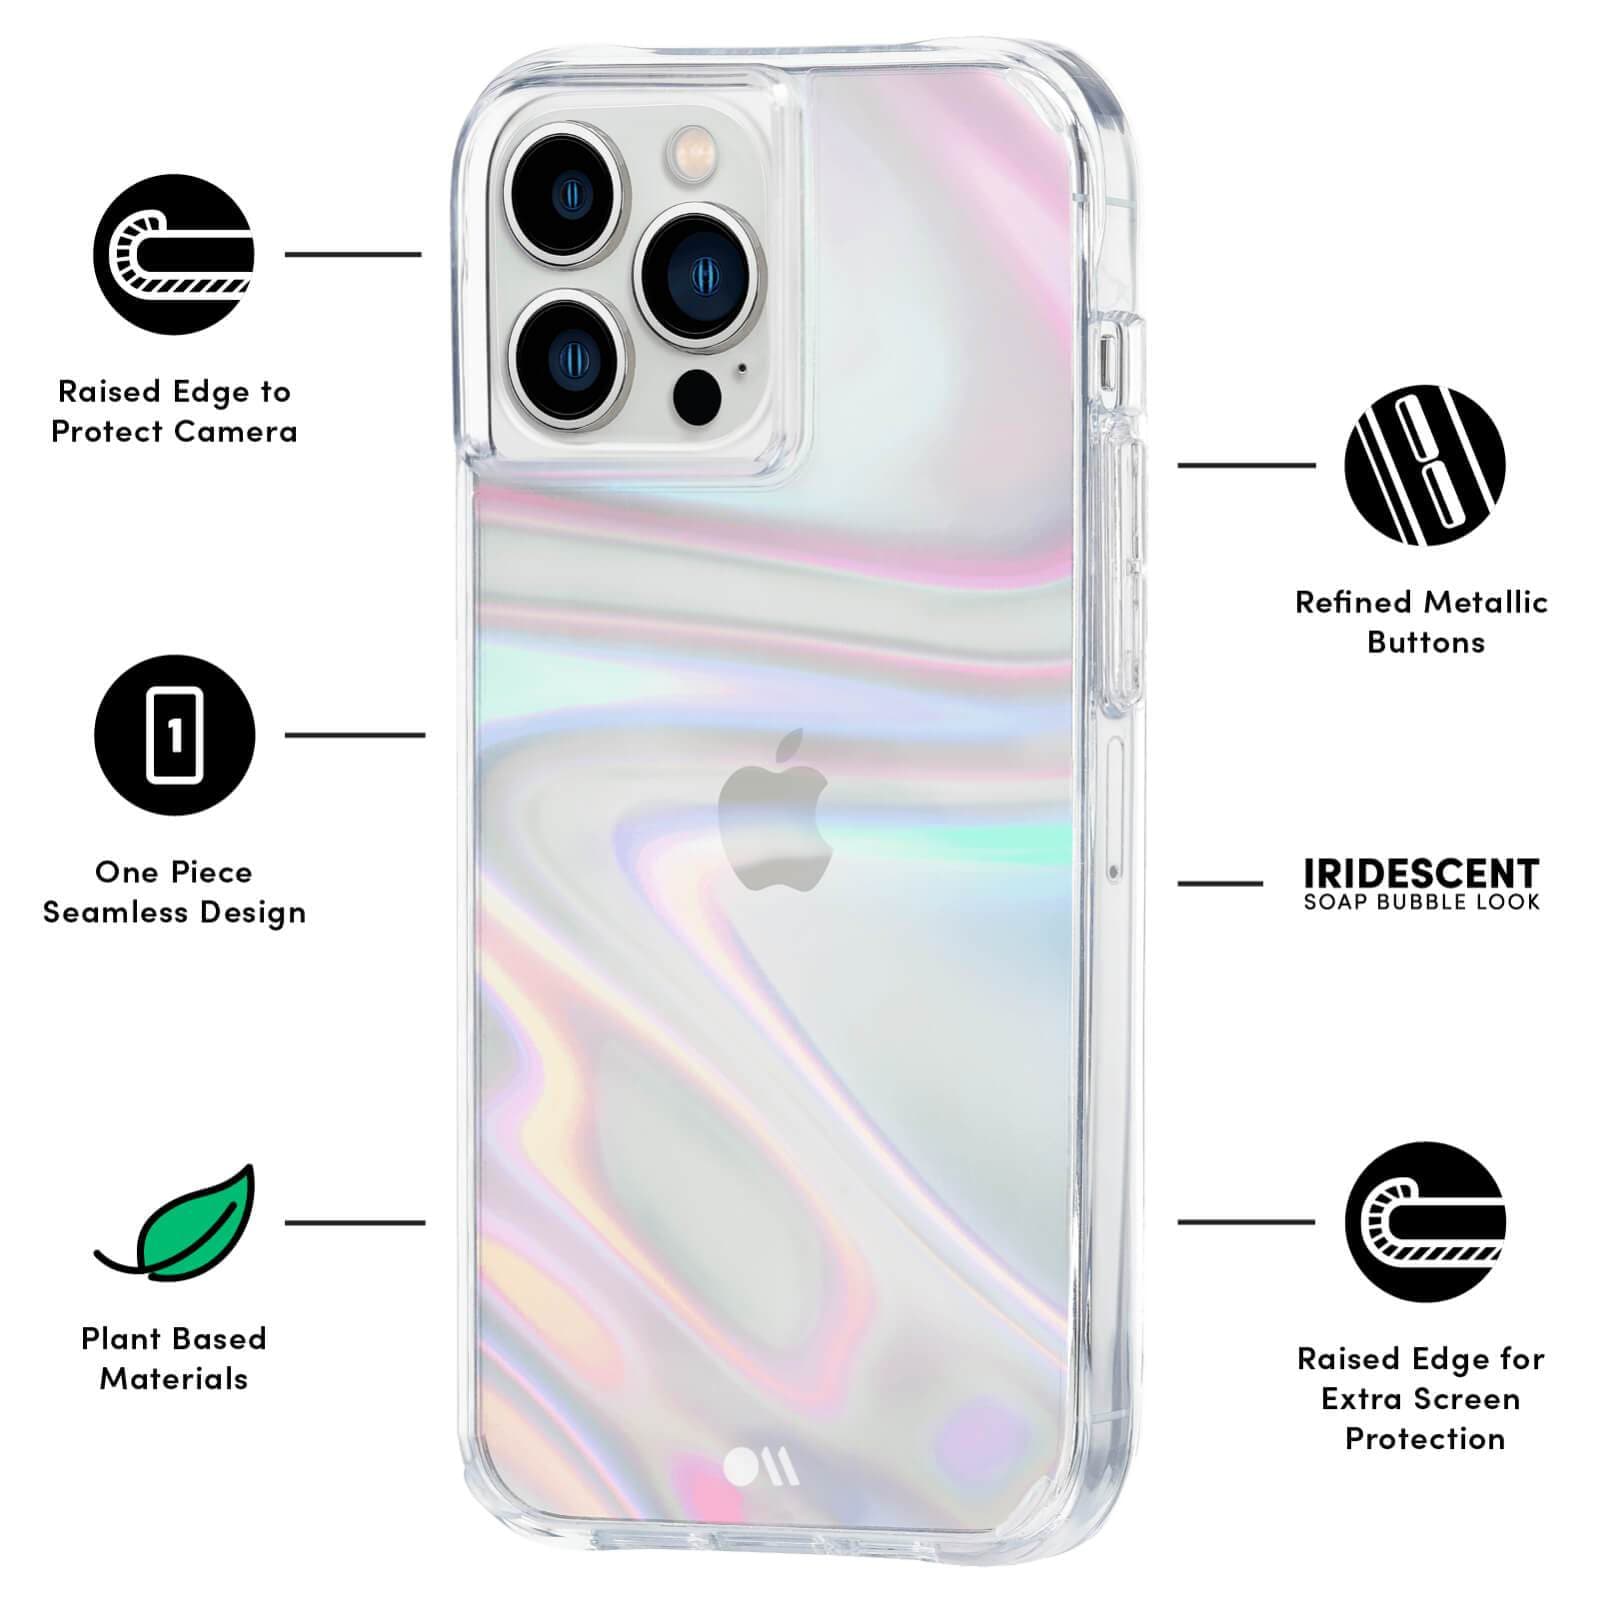 FEATURES: RAISED EDGE TO PROTECT CAMERA, ONE PIECE SEAMLESS DESIGN, PLANT BASED MATERIALS, REFIED METALLIC BUTTONS, IRIDESCENT SOAP BUBBLE LOOK, RAISED EDGE FOR EXTRA SCREEN PROTECTION. COLOR::SOAP BUBBLE